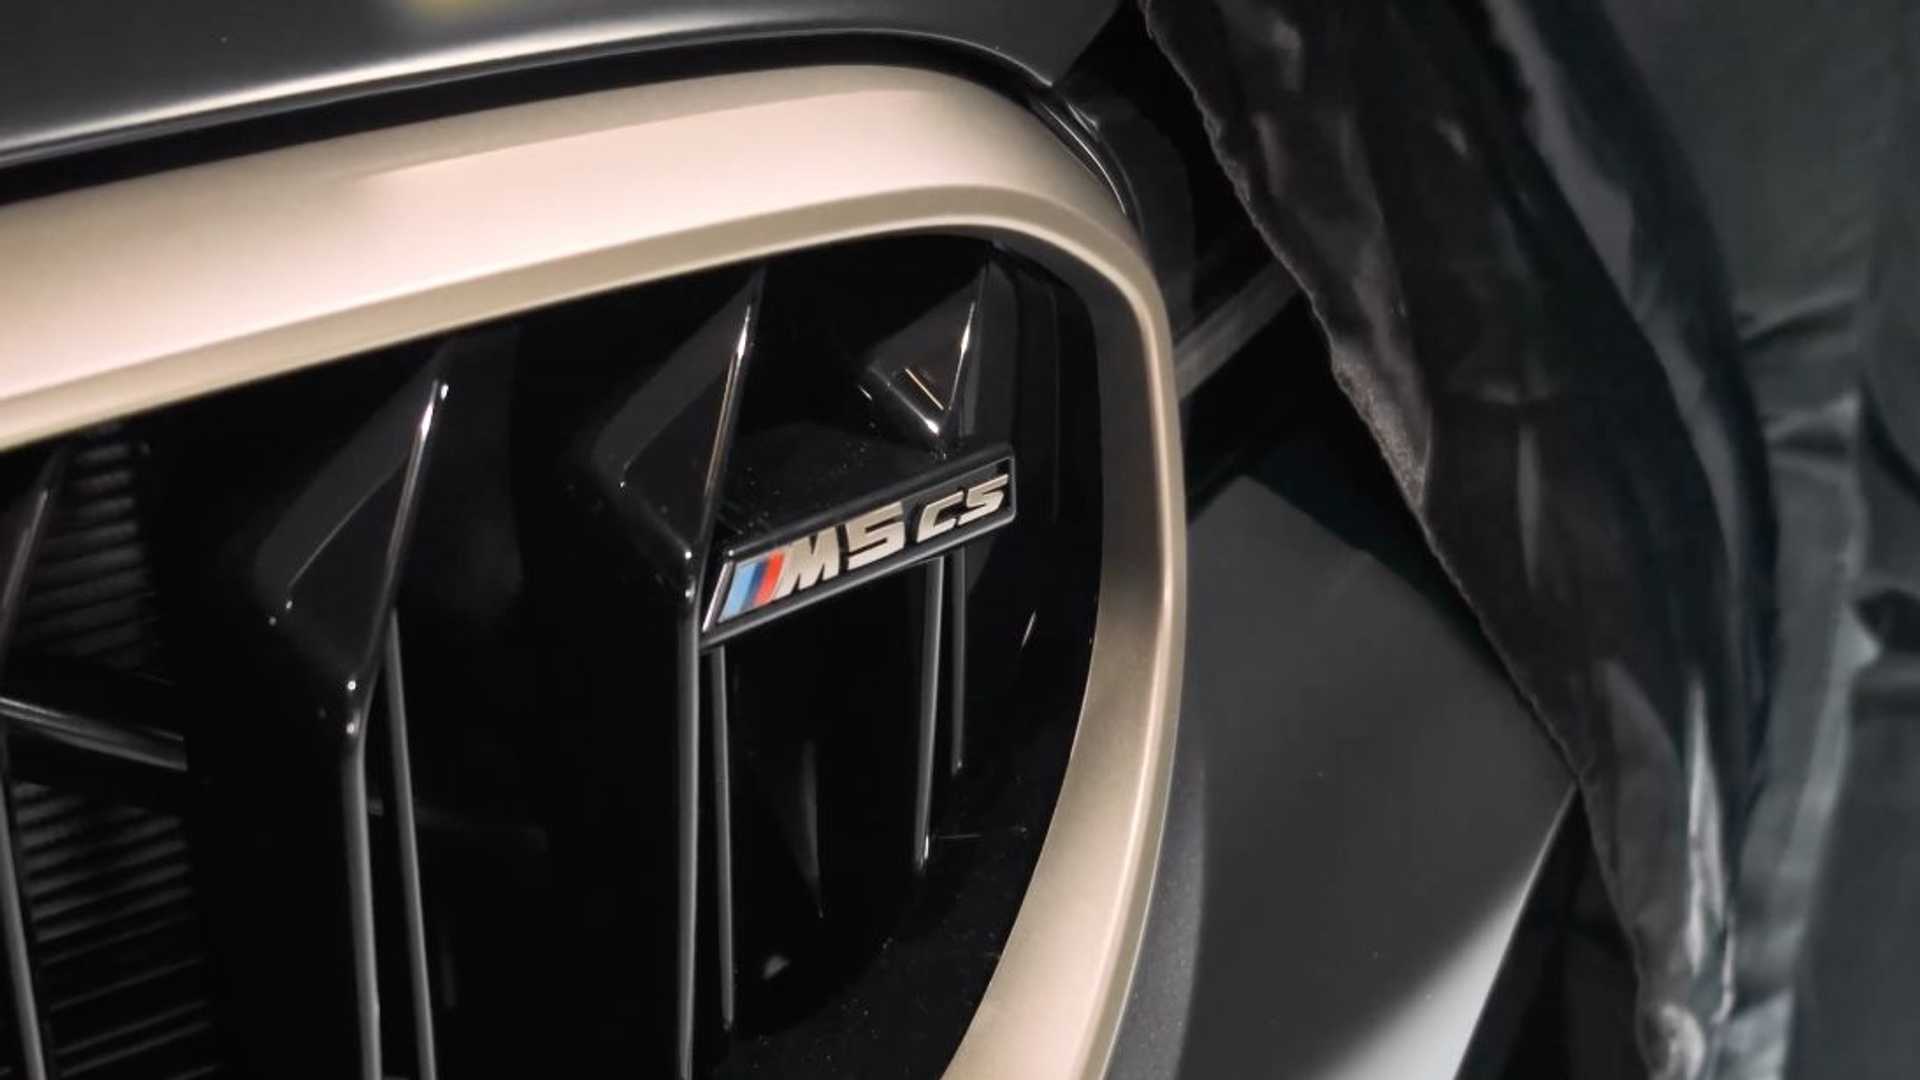 BMW reveals the first details of the M5 CS debuting in January 2021